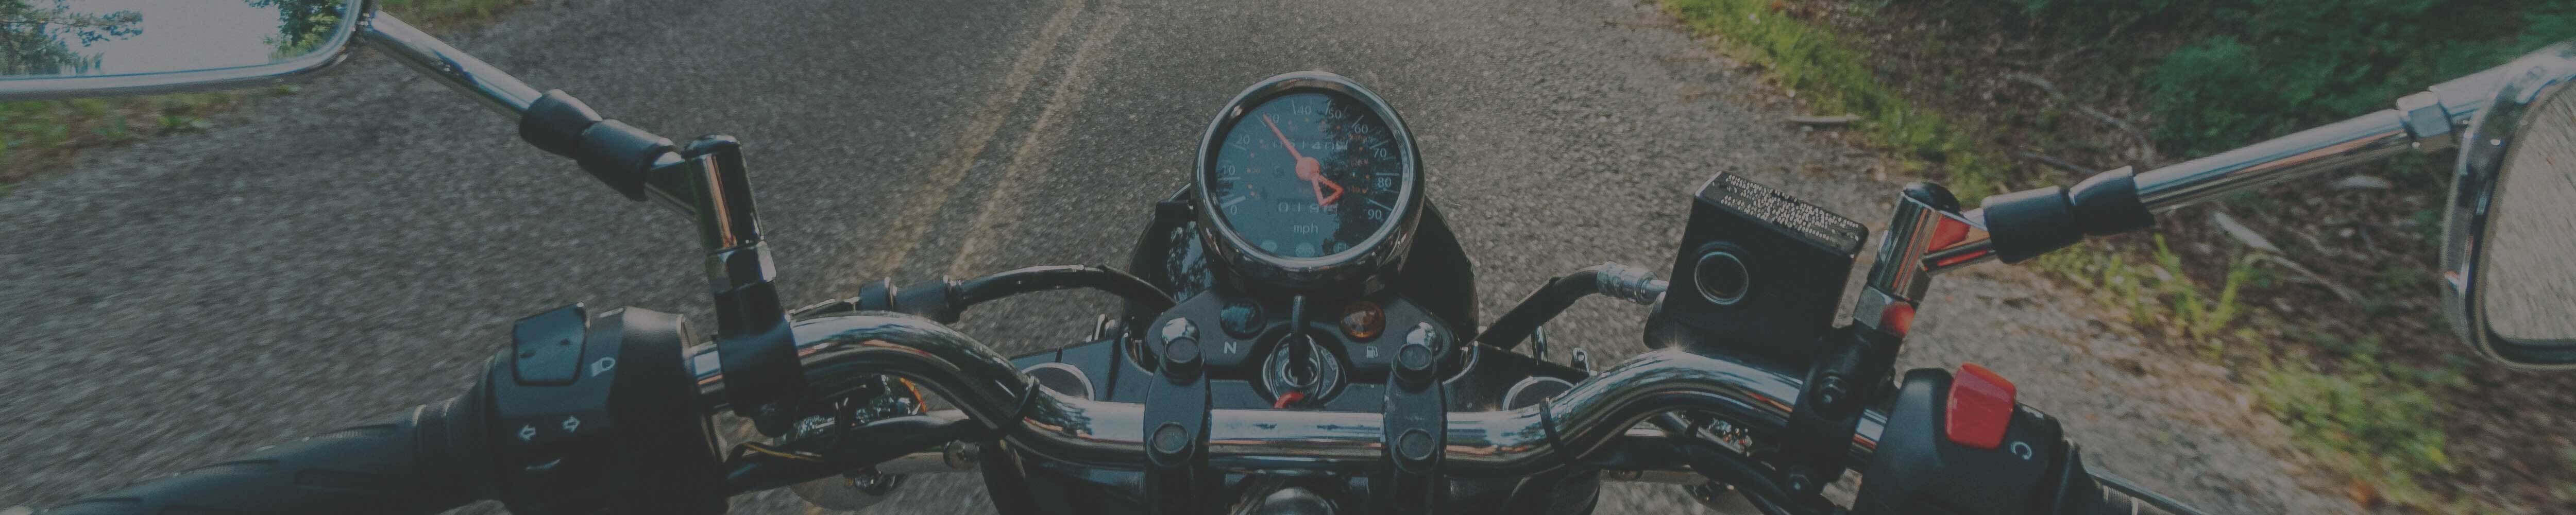 Motorcycle rider point of view.